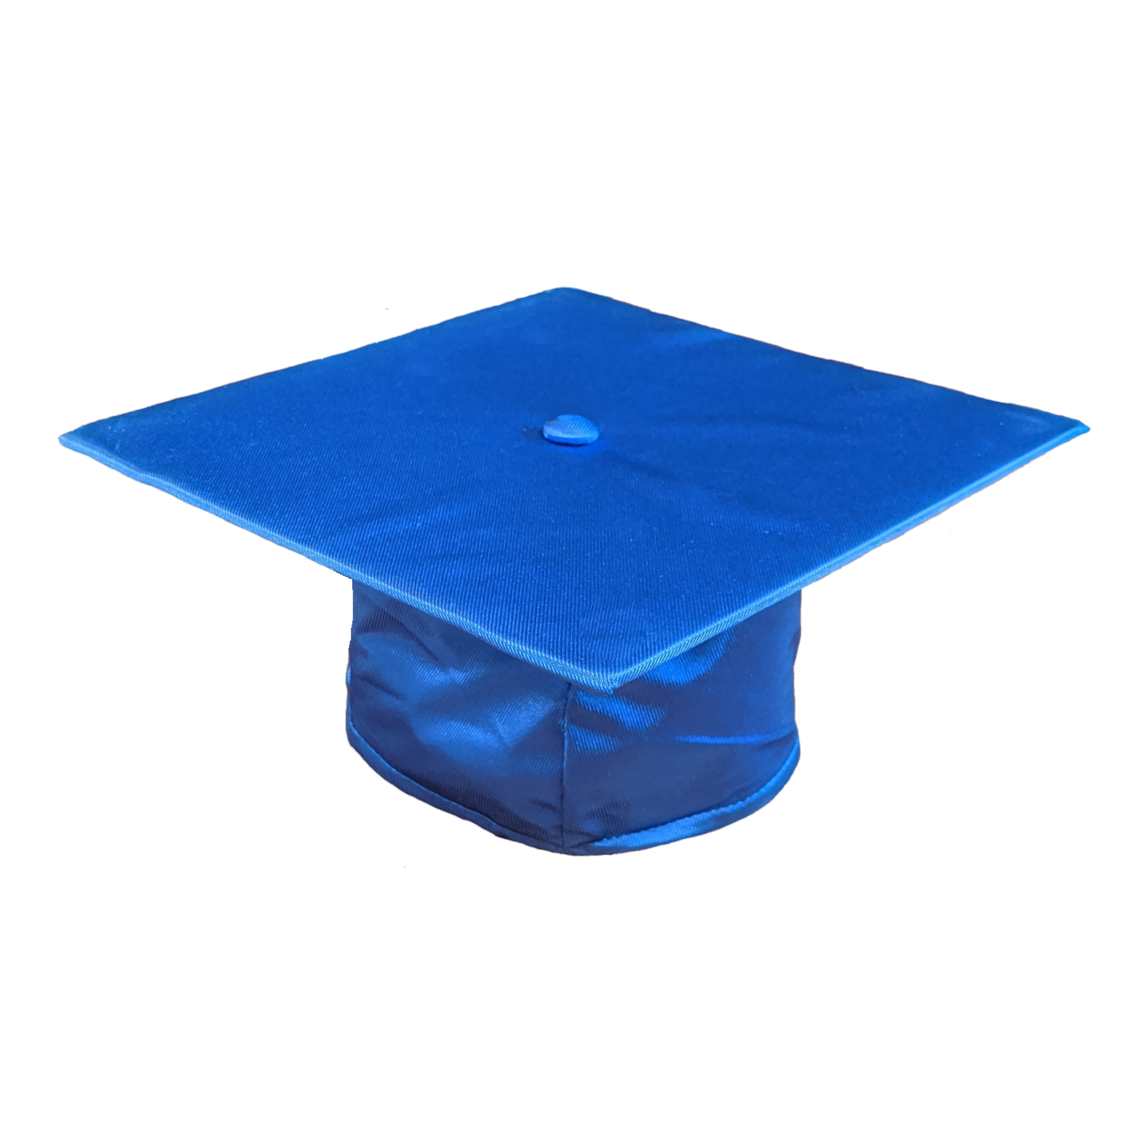 Elementary School Graduation Caps and Gowns | Oriental Trading Company